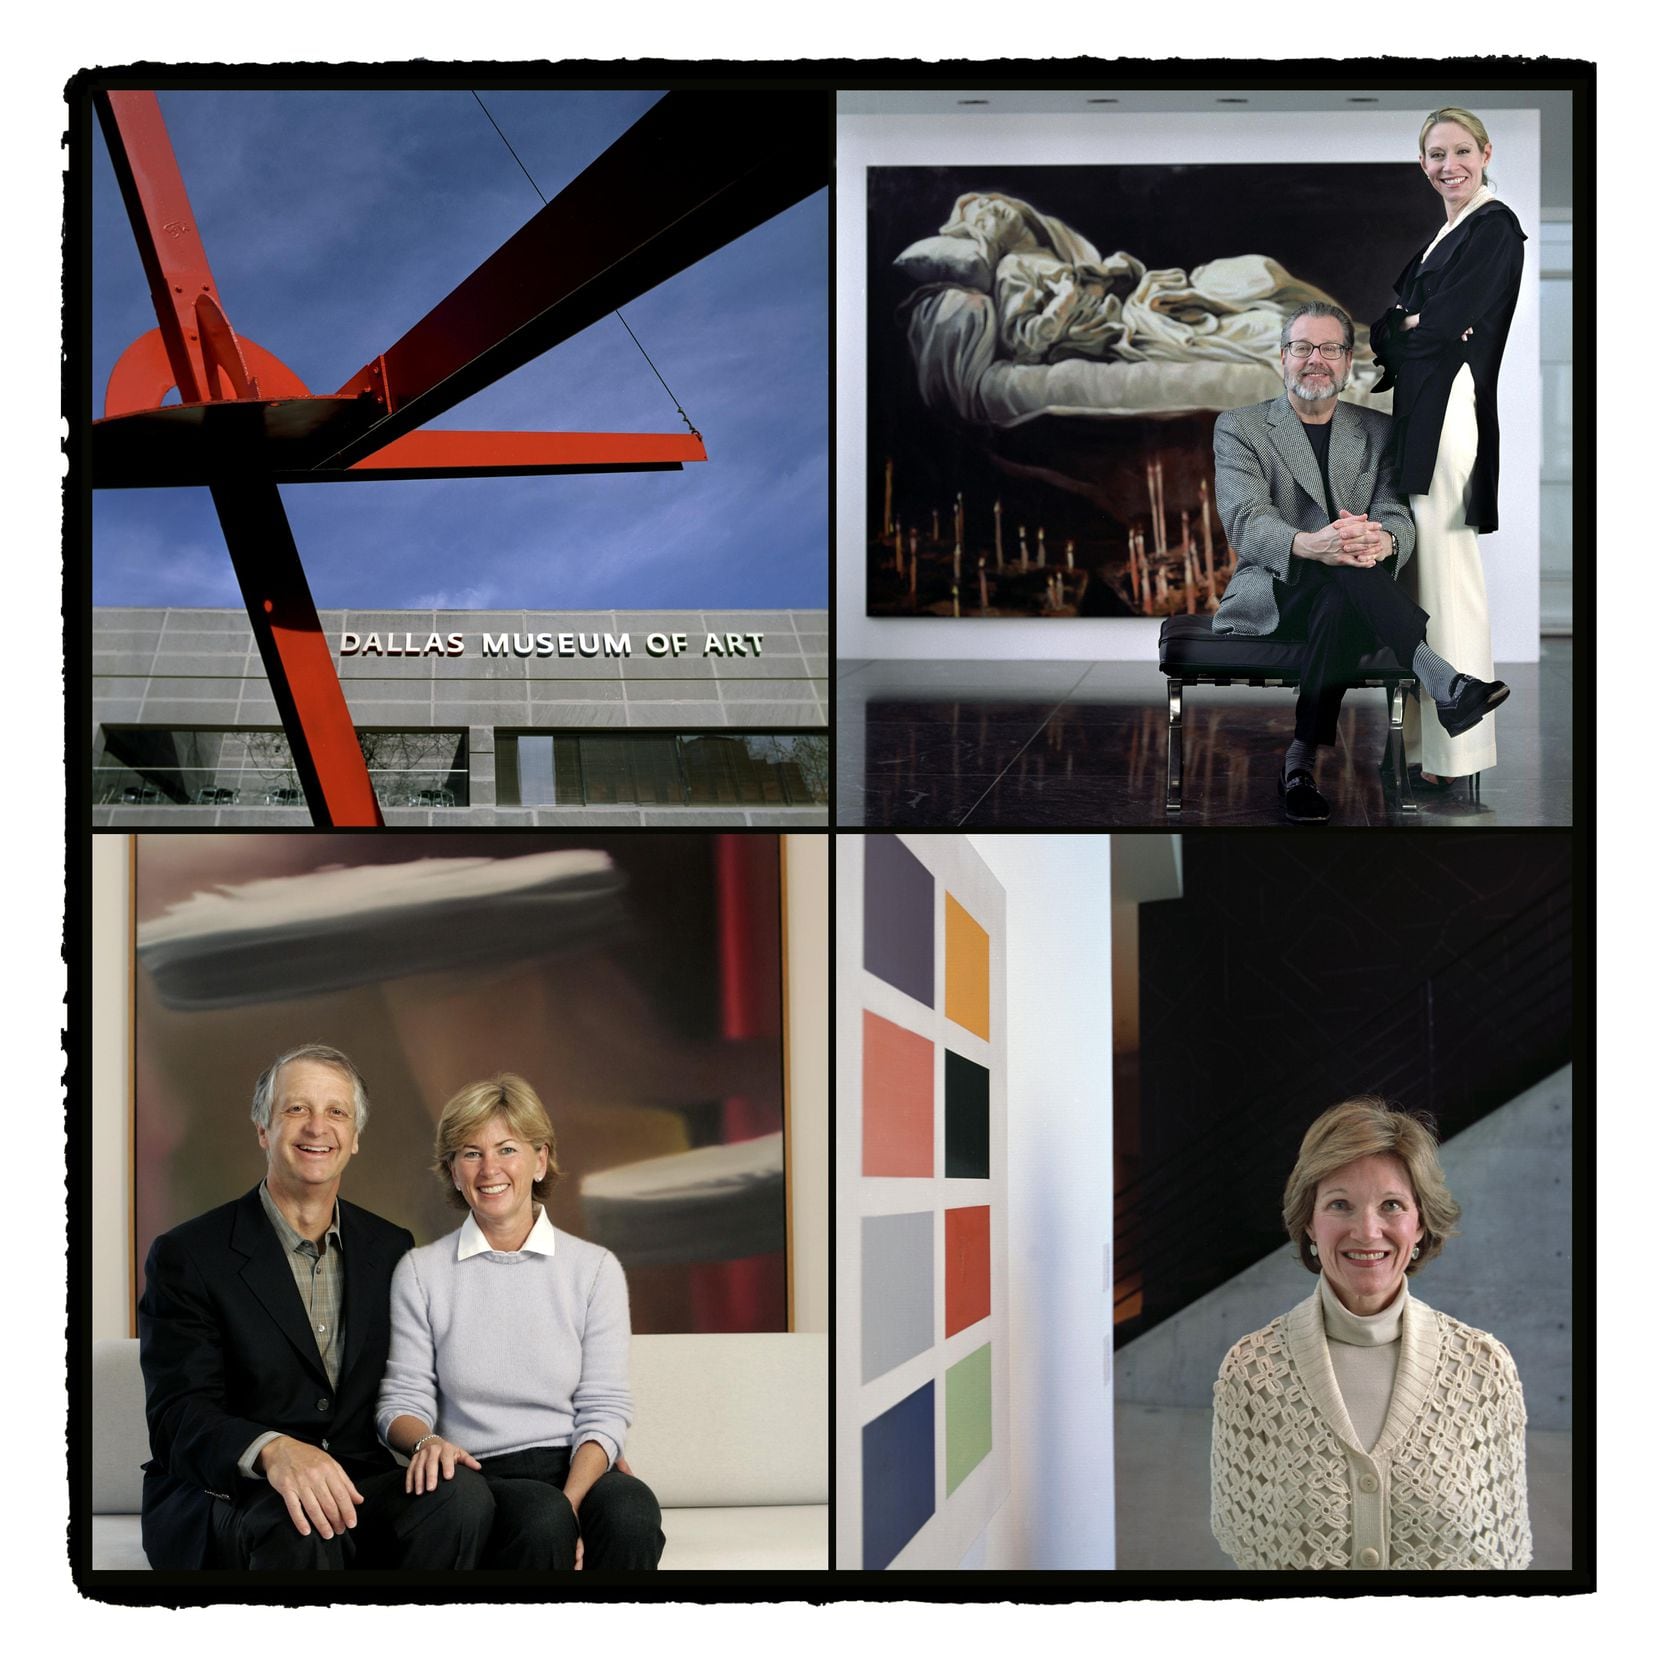 Howard and Cindy Rachofsky (top right) Robert and Marguerite Hoffman (bottom left) and Deedie Rose (bottom right) all agreed to donate their art collections to the Dallas Museum of Art (top left) following their passing. All photographs were made February 15, 2005, at the DMA and the homes of each family.
